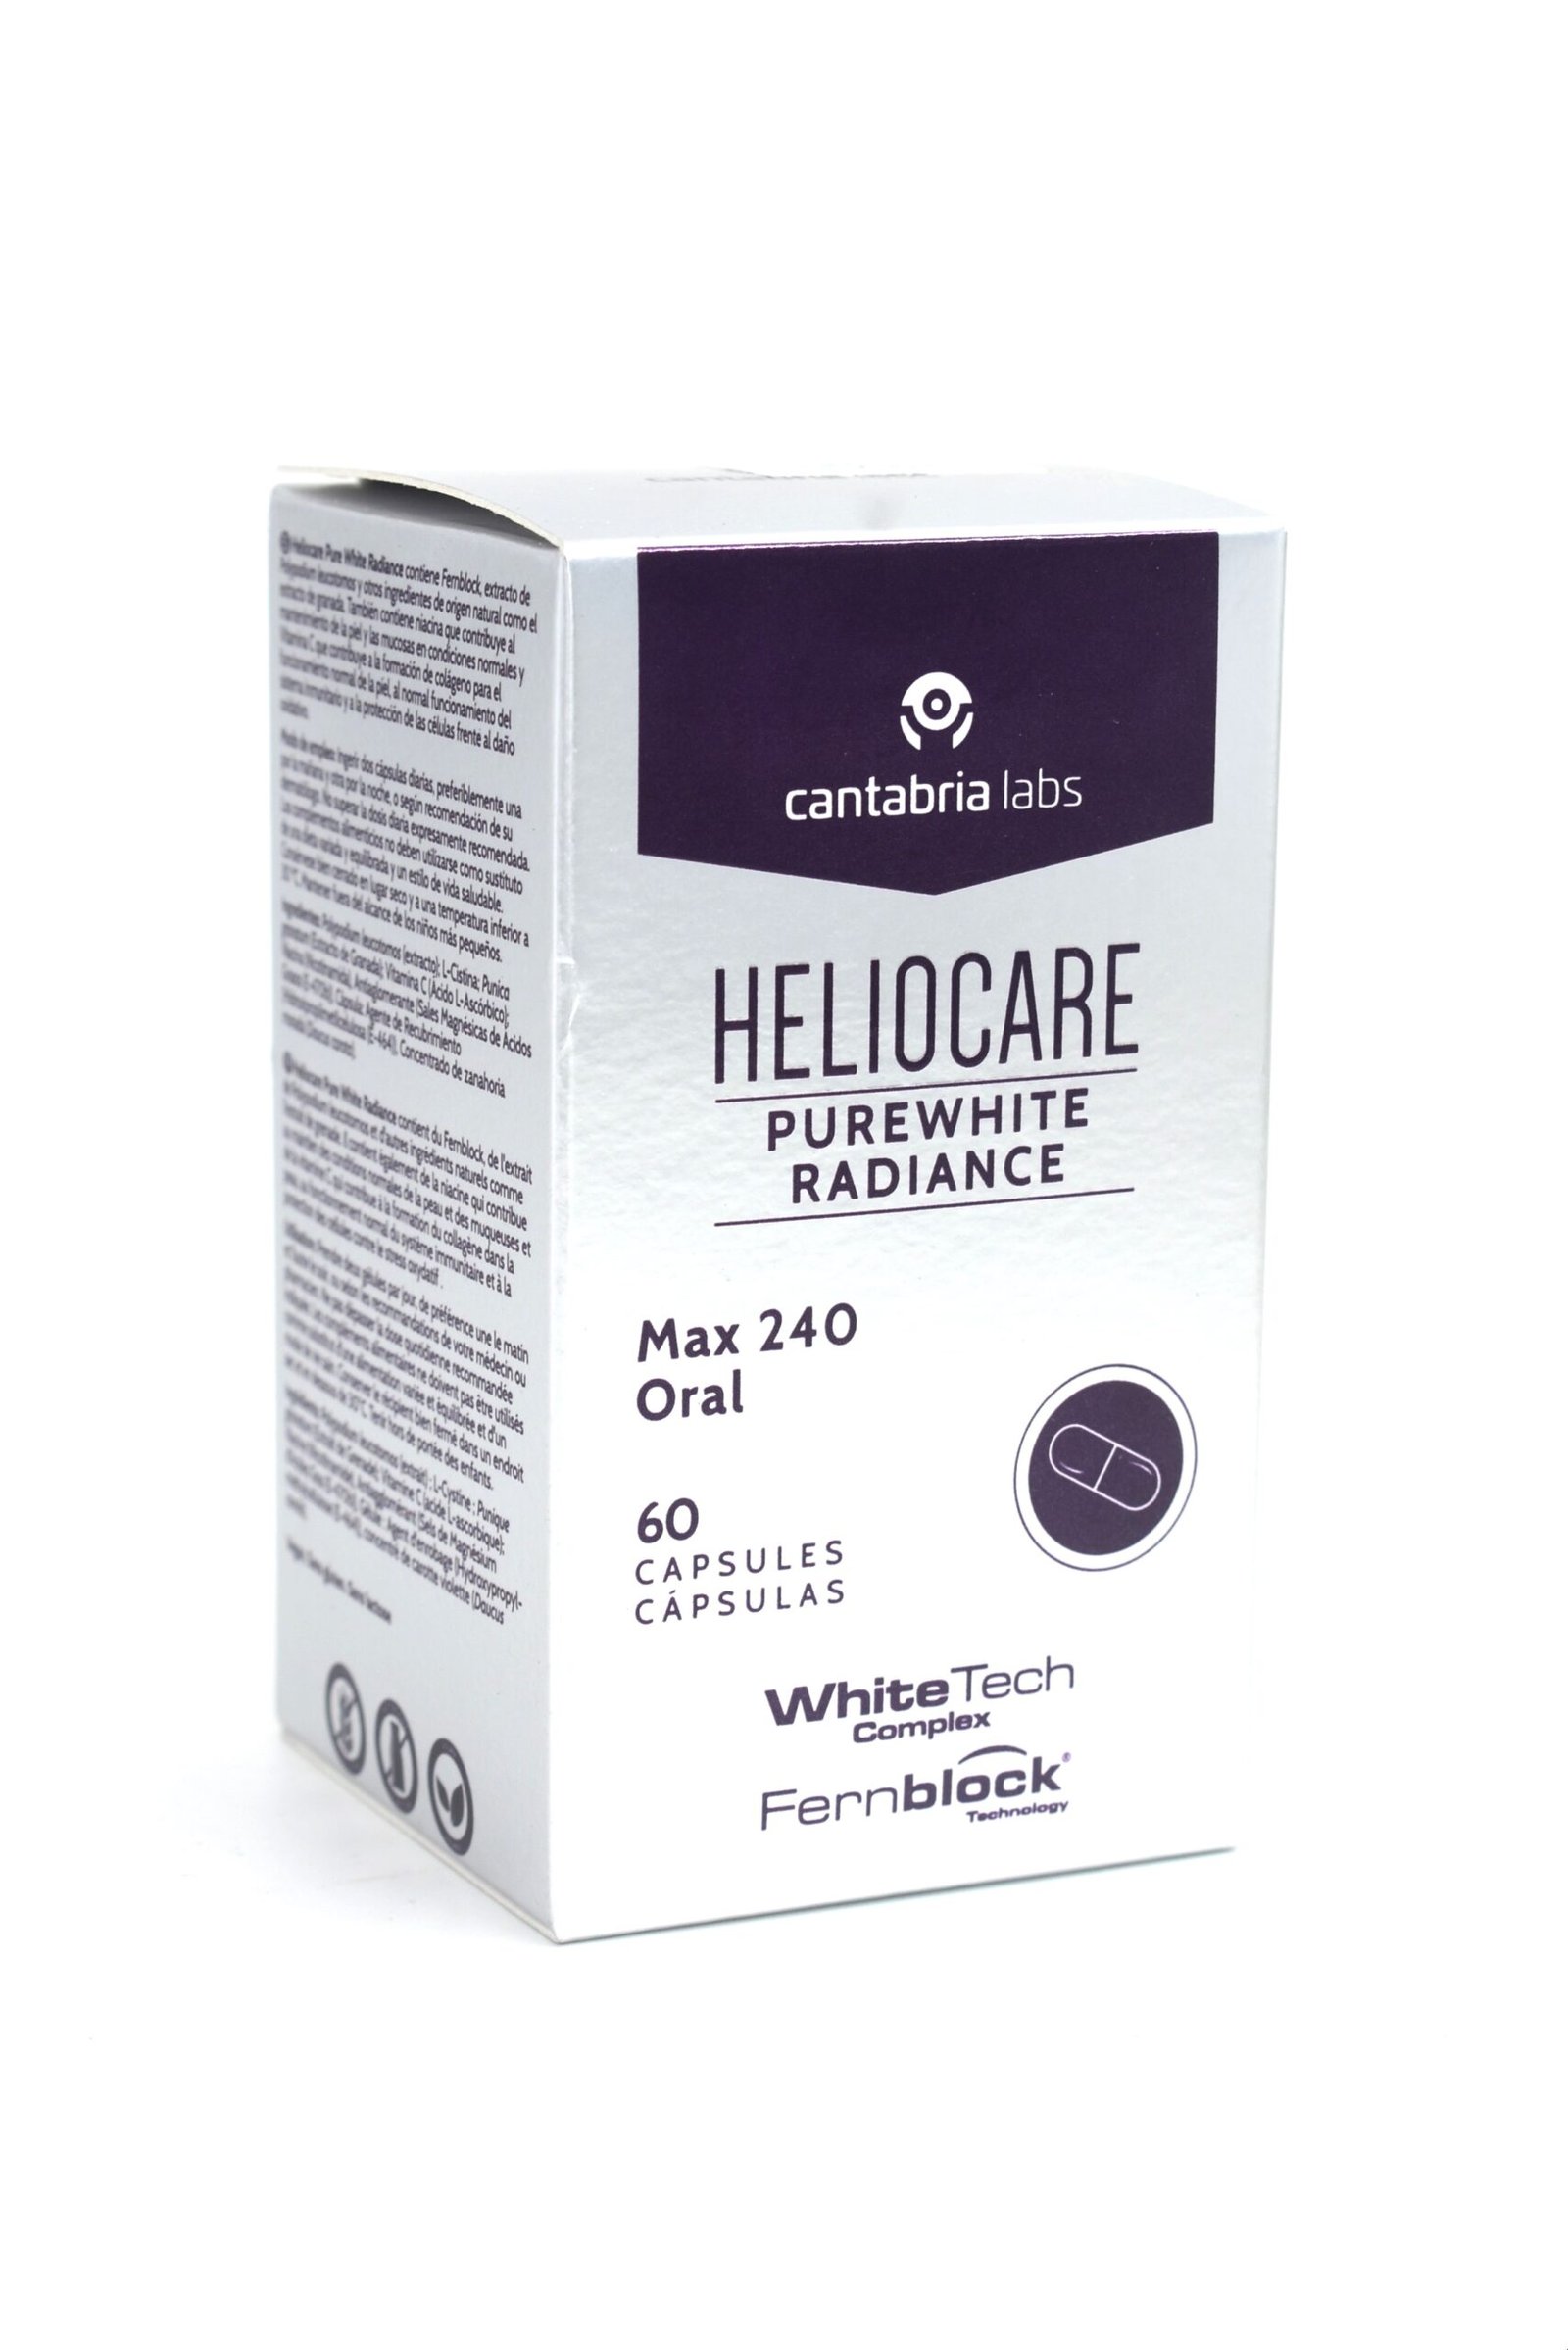 HELIOCARE PUREWHITE RADIANCE 60 CAPSULES - Now On Super